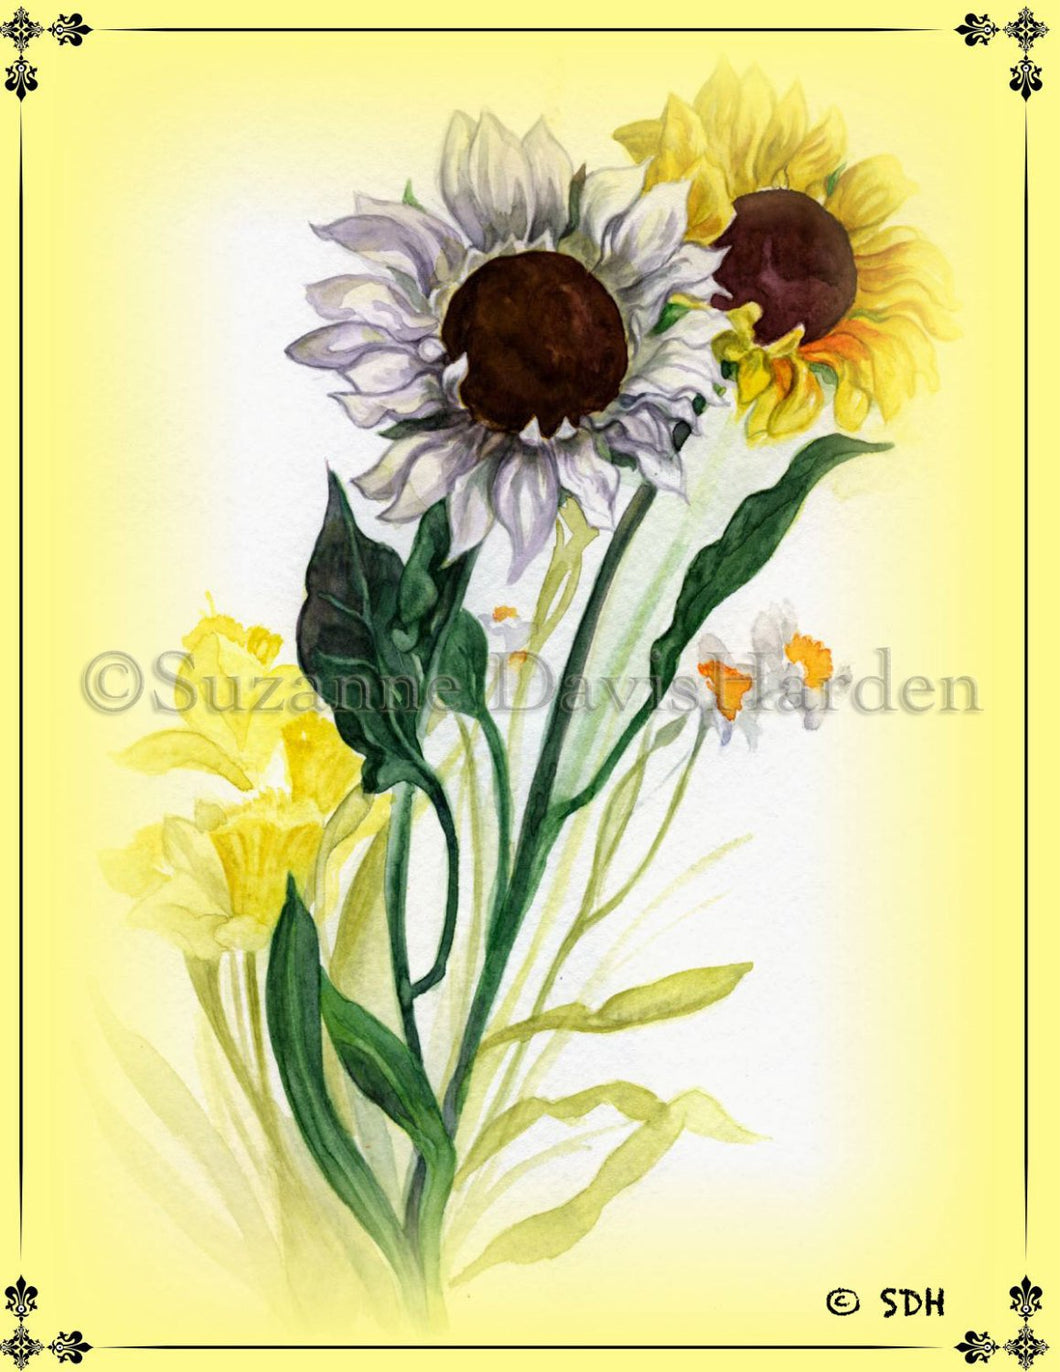 Encouraging Card ~Sunflower with Inspirational Scripture Illustrated by Suzanne Davis Harden